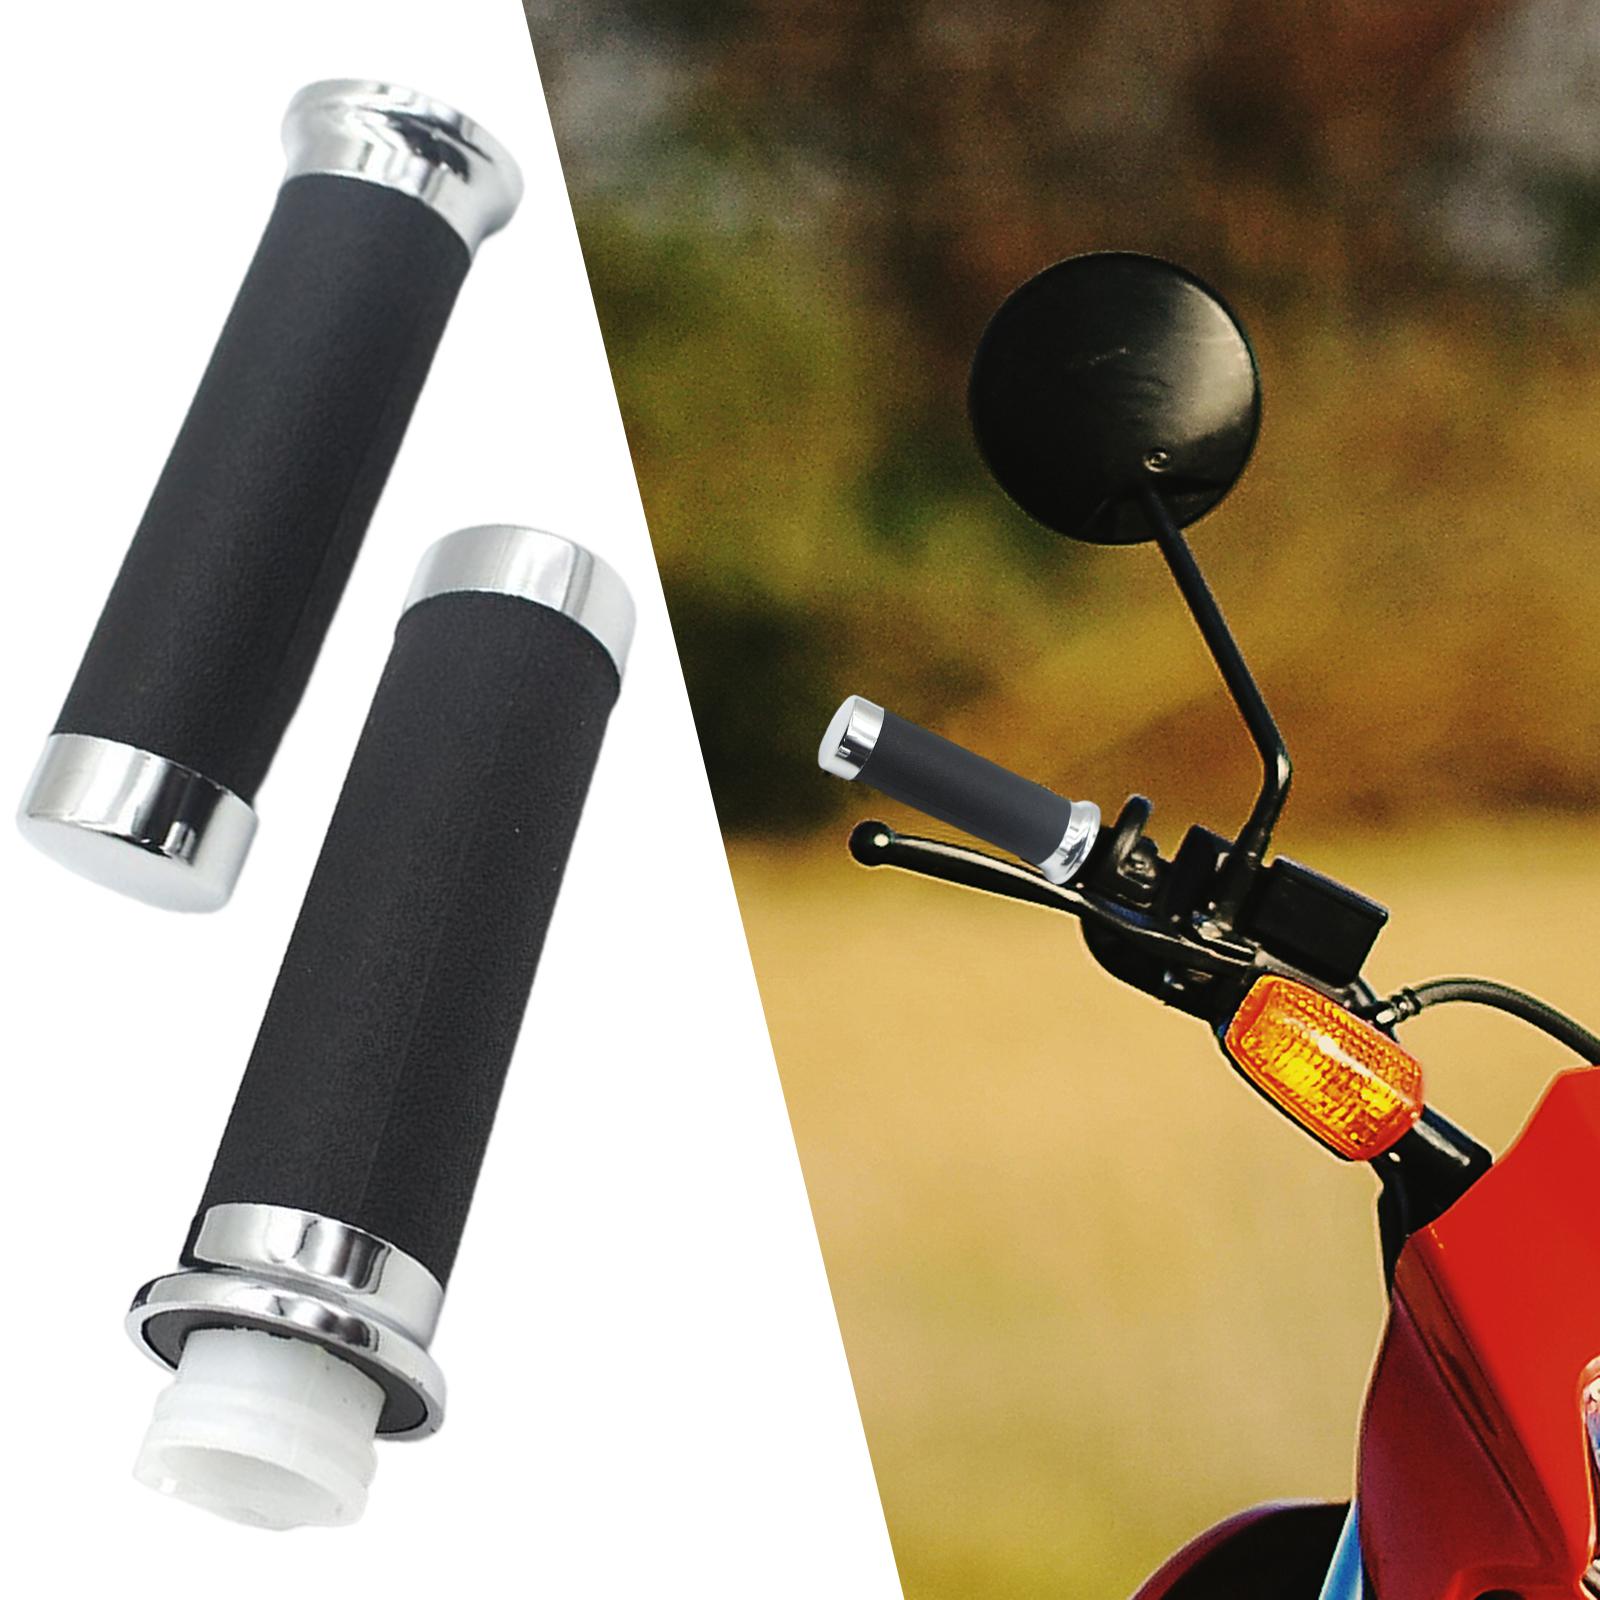 2 Pieces 28mm Motorcycle Handlebar Grips Handle Grips for Honda Magna 250 Magne250 Shadow 400 750 Replacement Durable